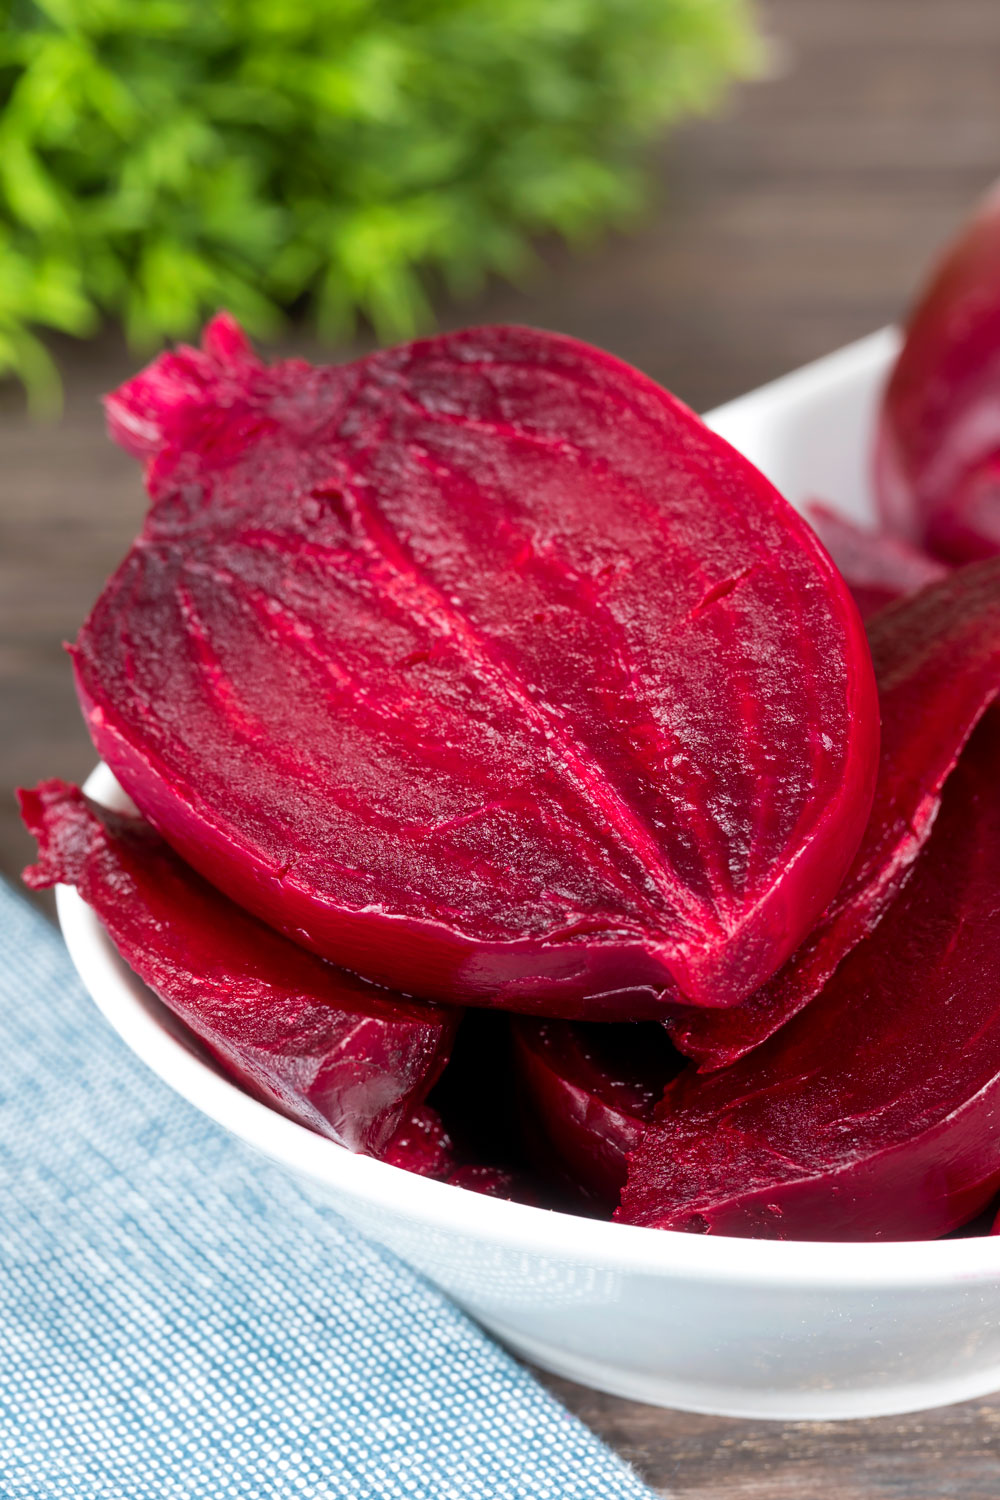 How to Cook Beets (Boiled, Instant Pot, Roasted/Air Fried